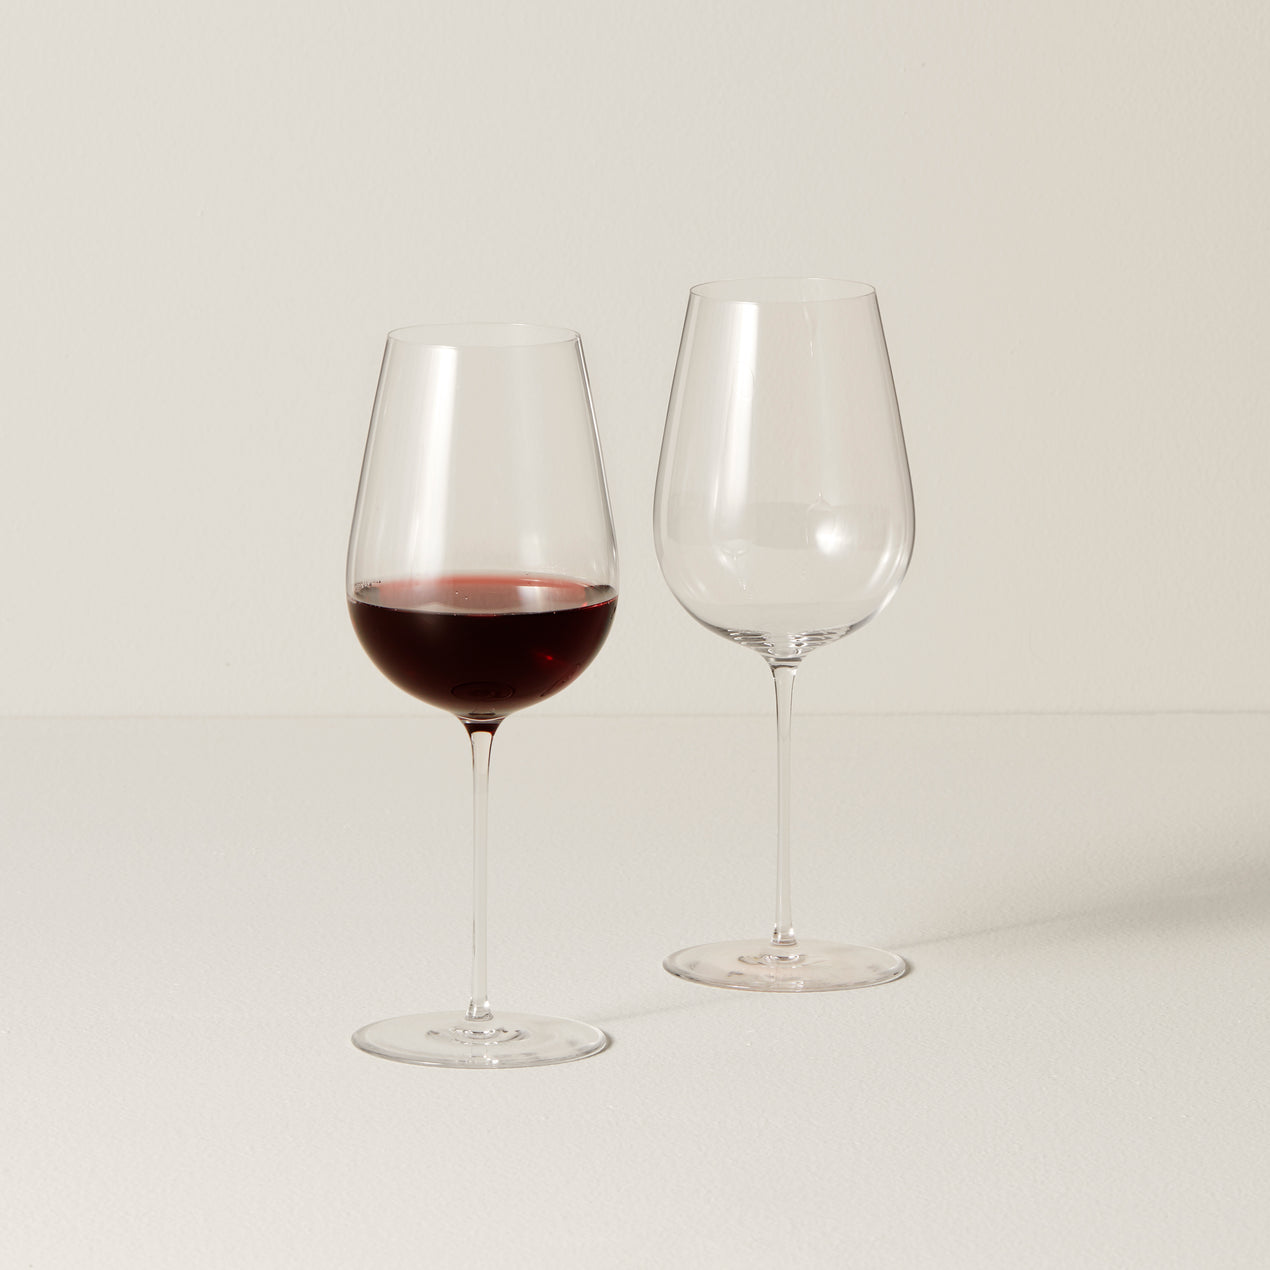 Cornell University Red Wine Glasses - Set of 2 - Made in the USA